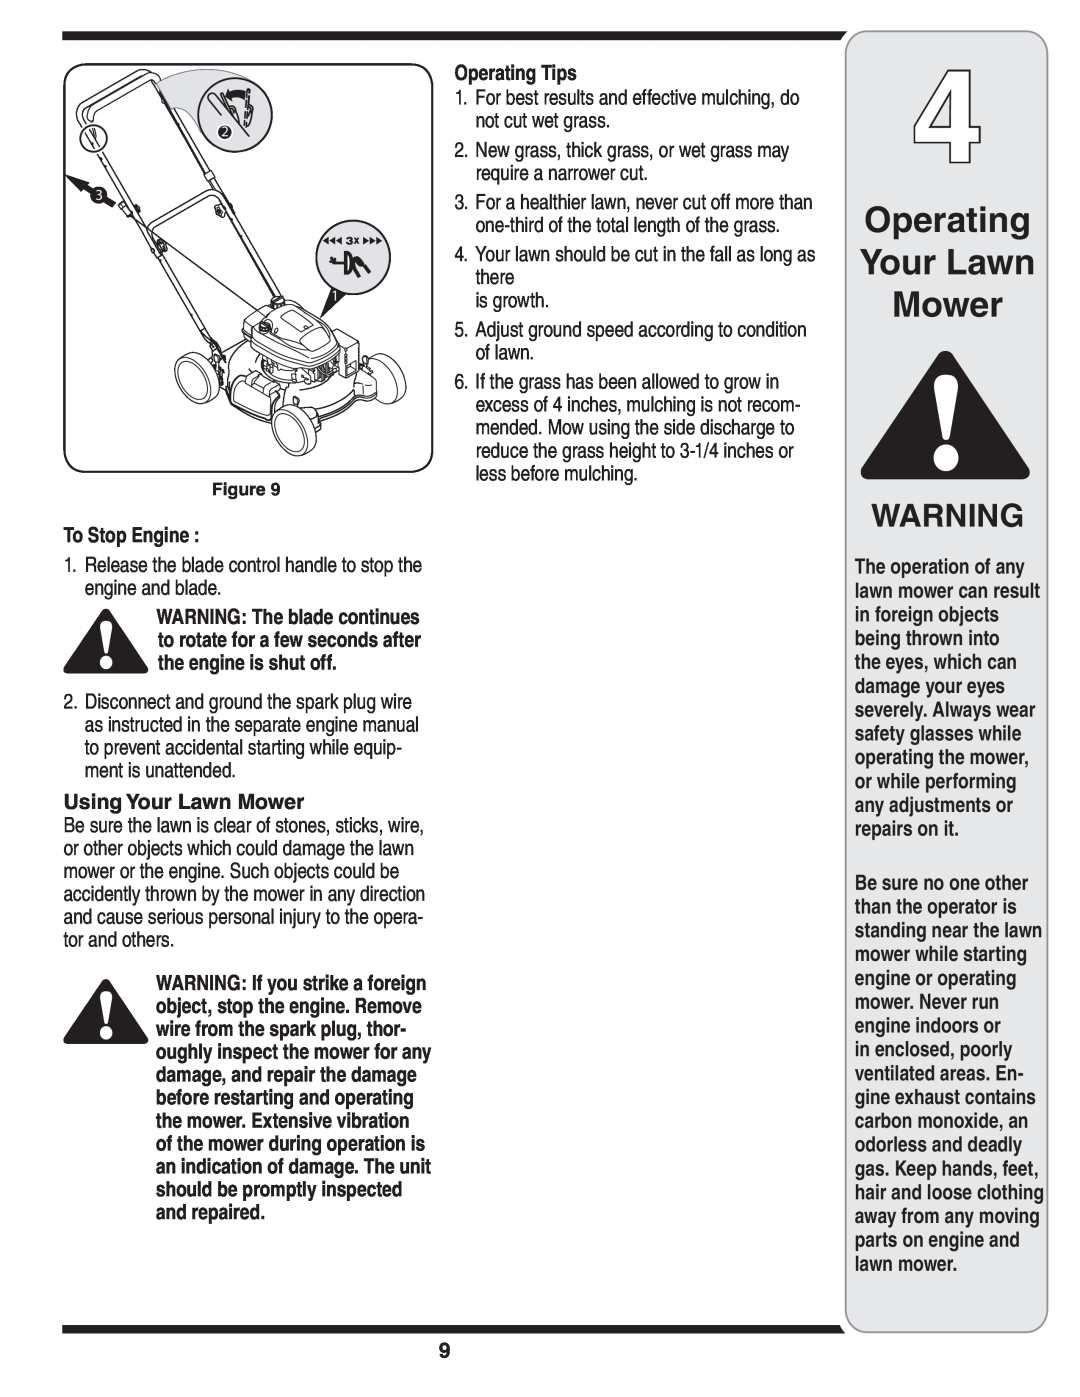 Yard-Man 100 manual To Stop Engine, Using Your Lawn Mower, Operating Tips, Operating Your Lawn Mower 